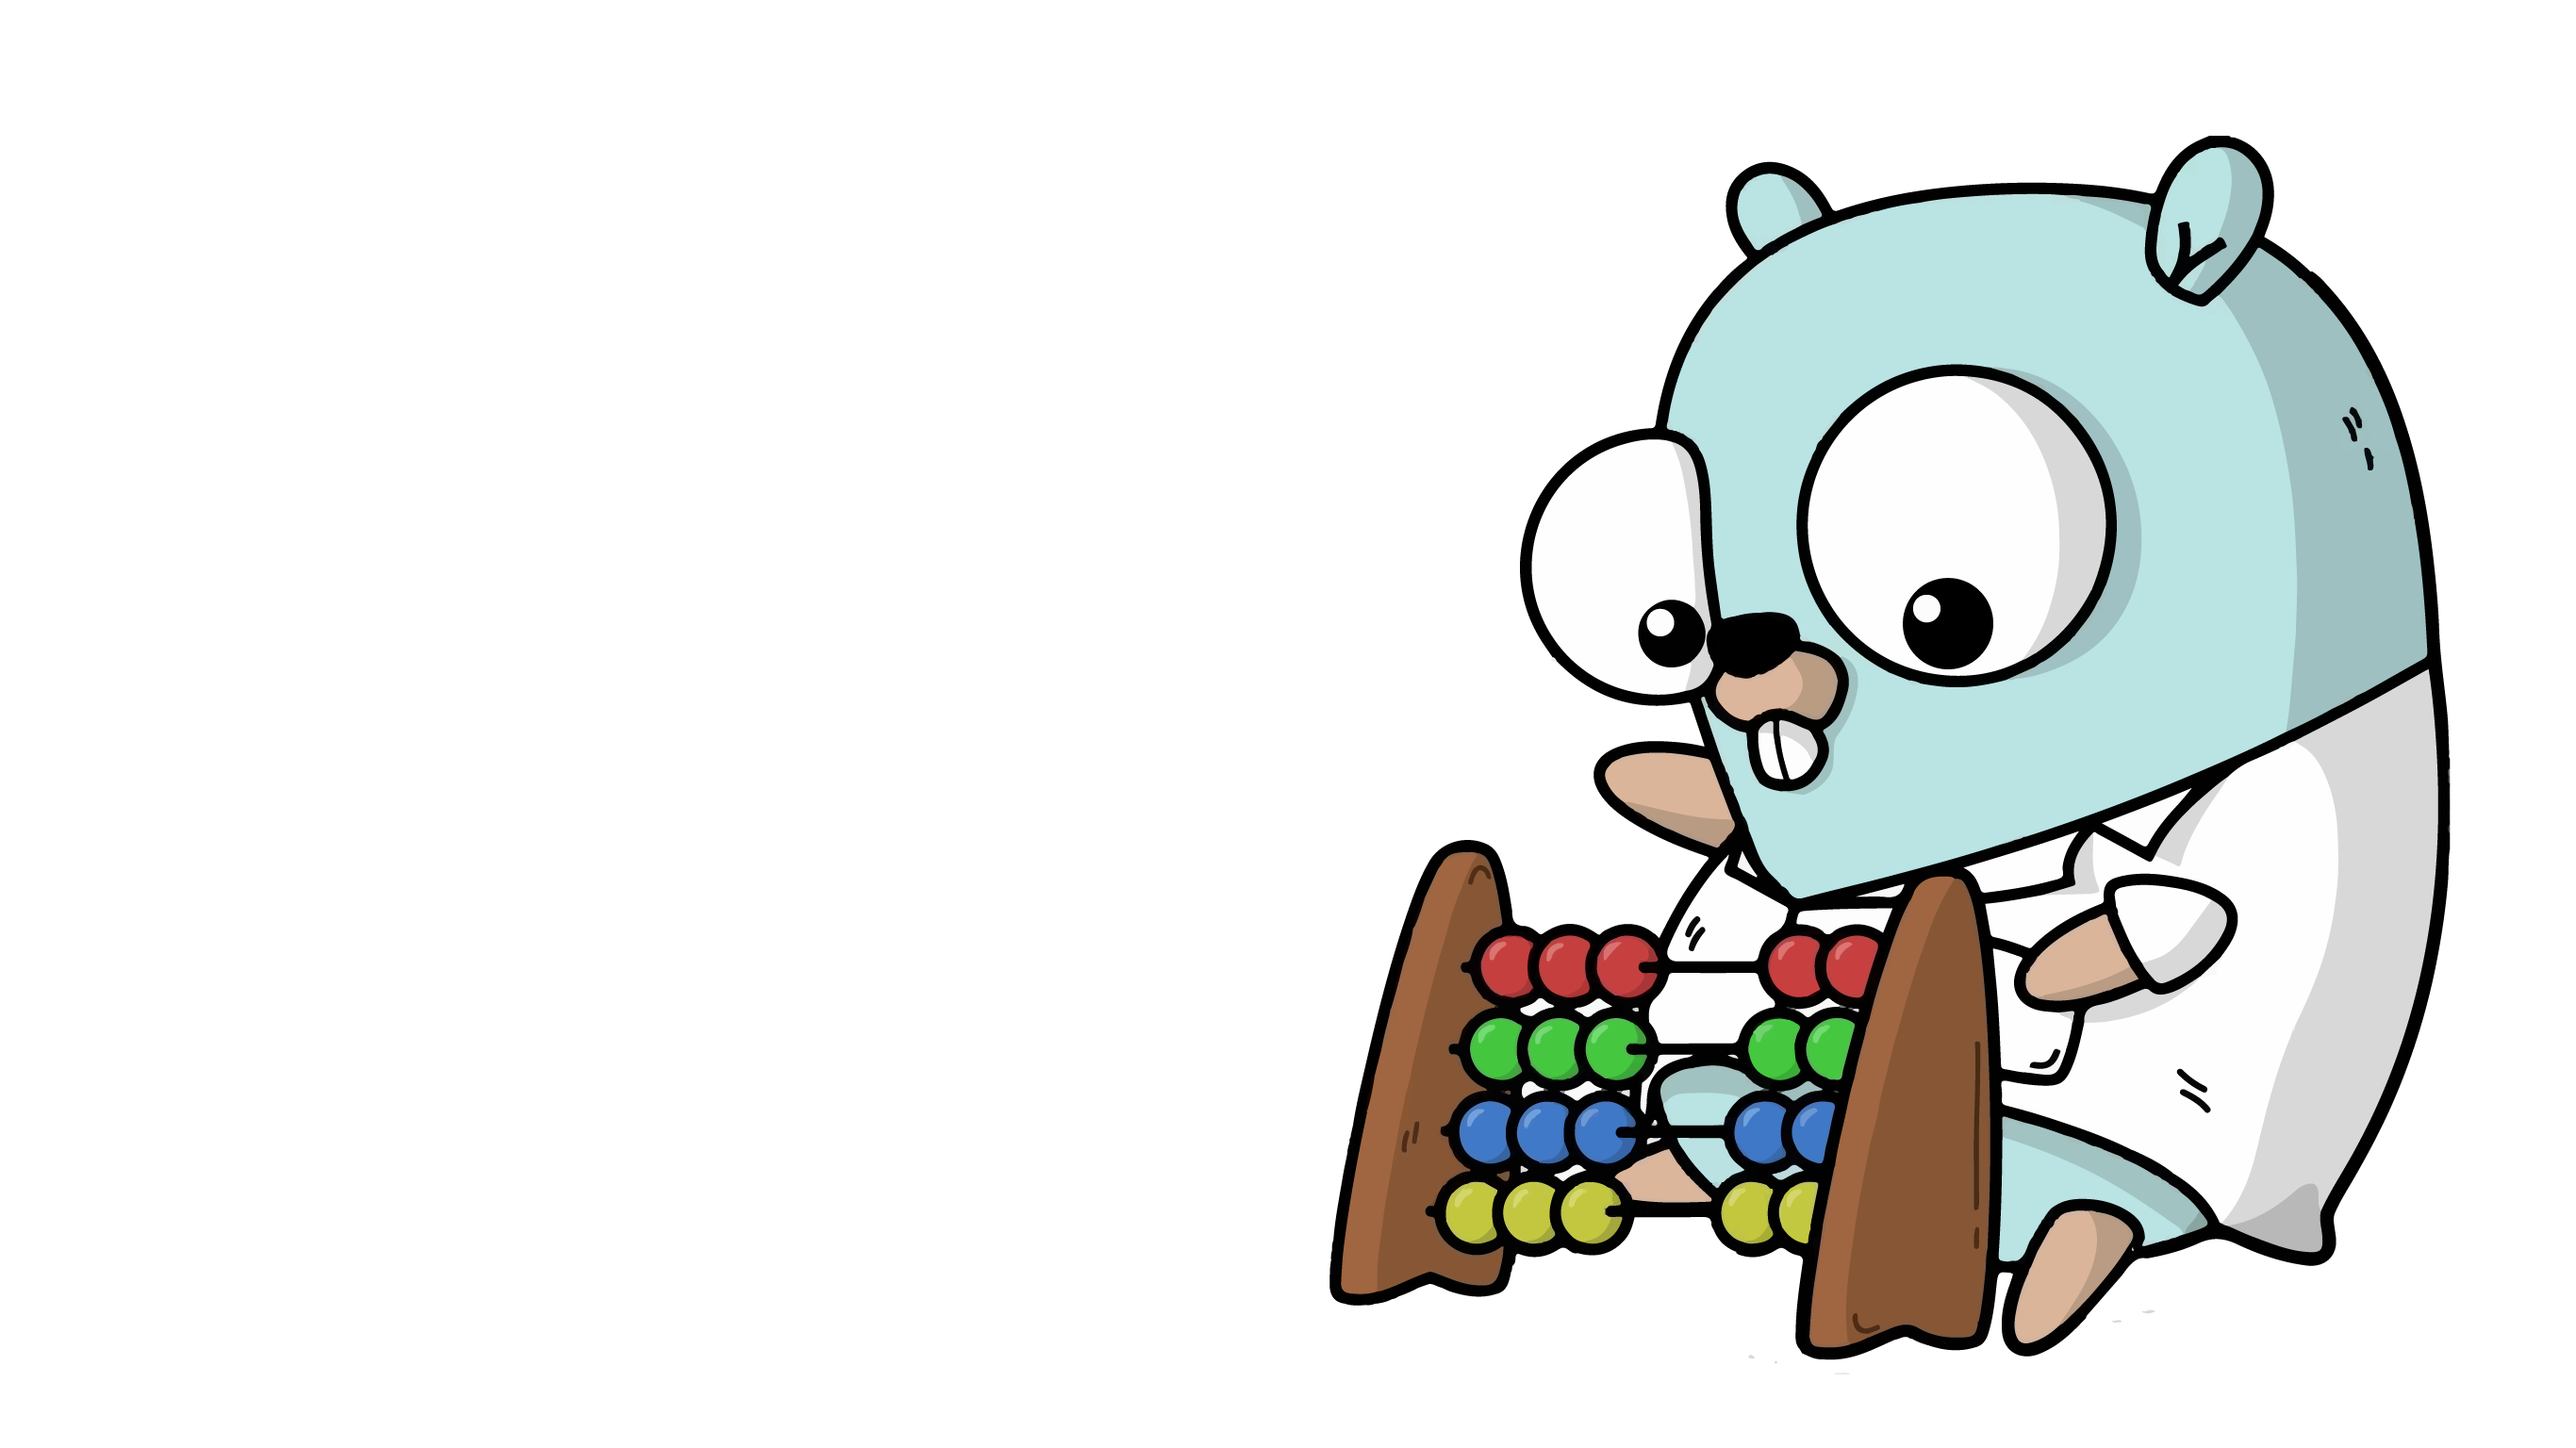 How to Use Mock Testing in Go